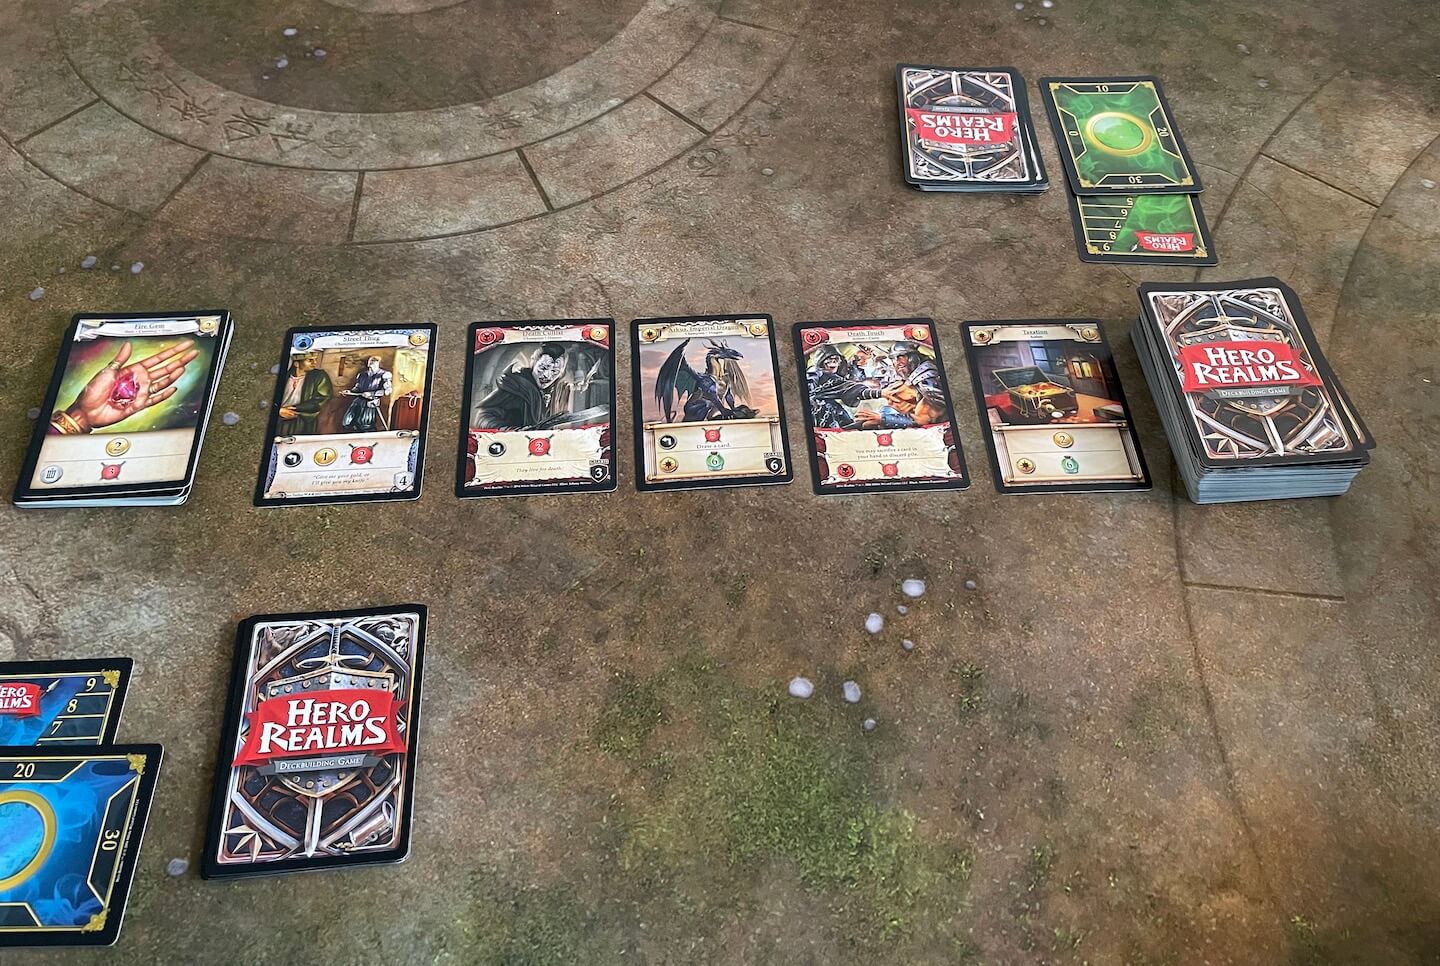 A typical two-player game of Hero Realms